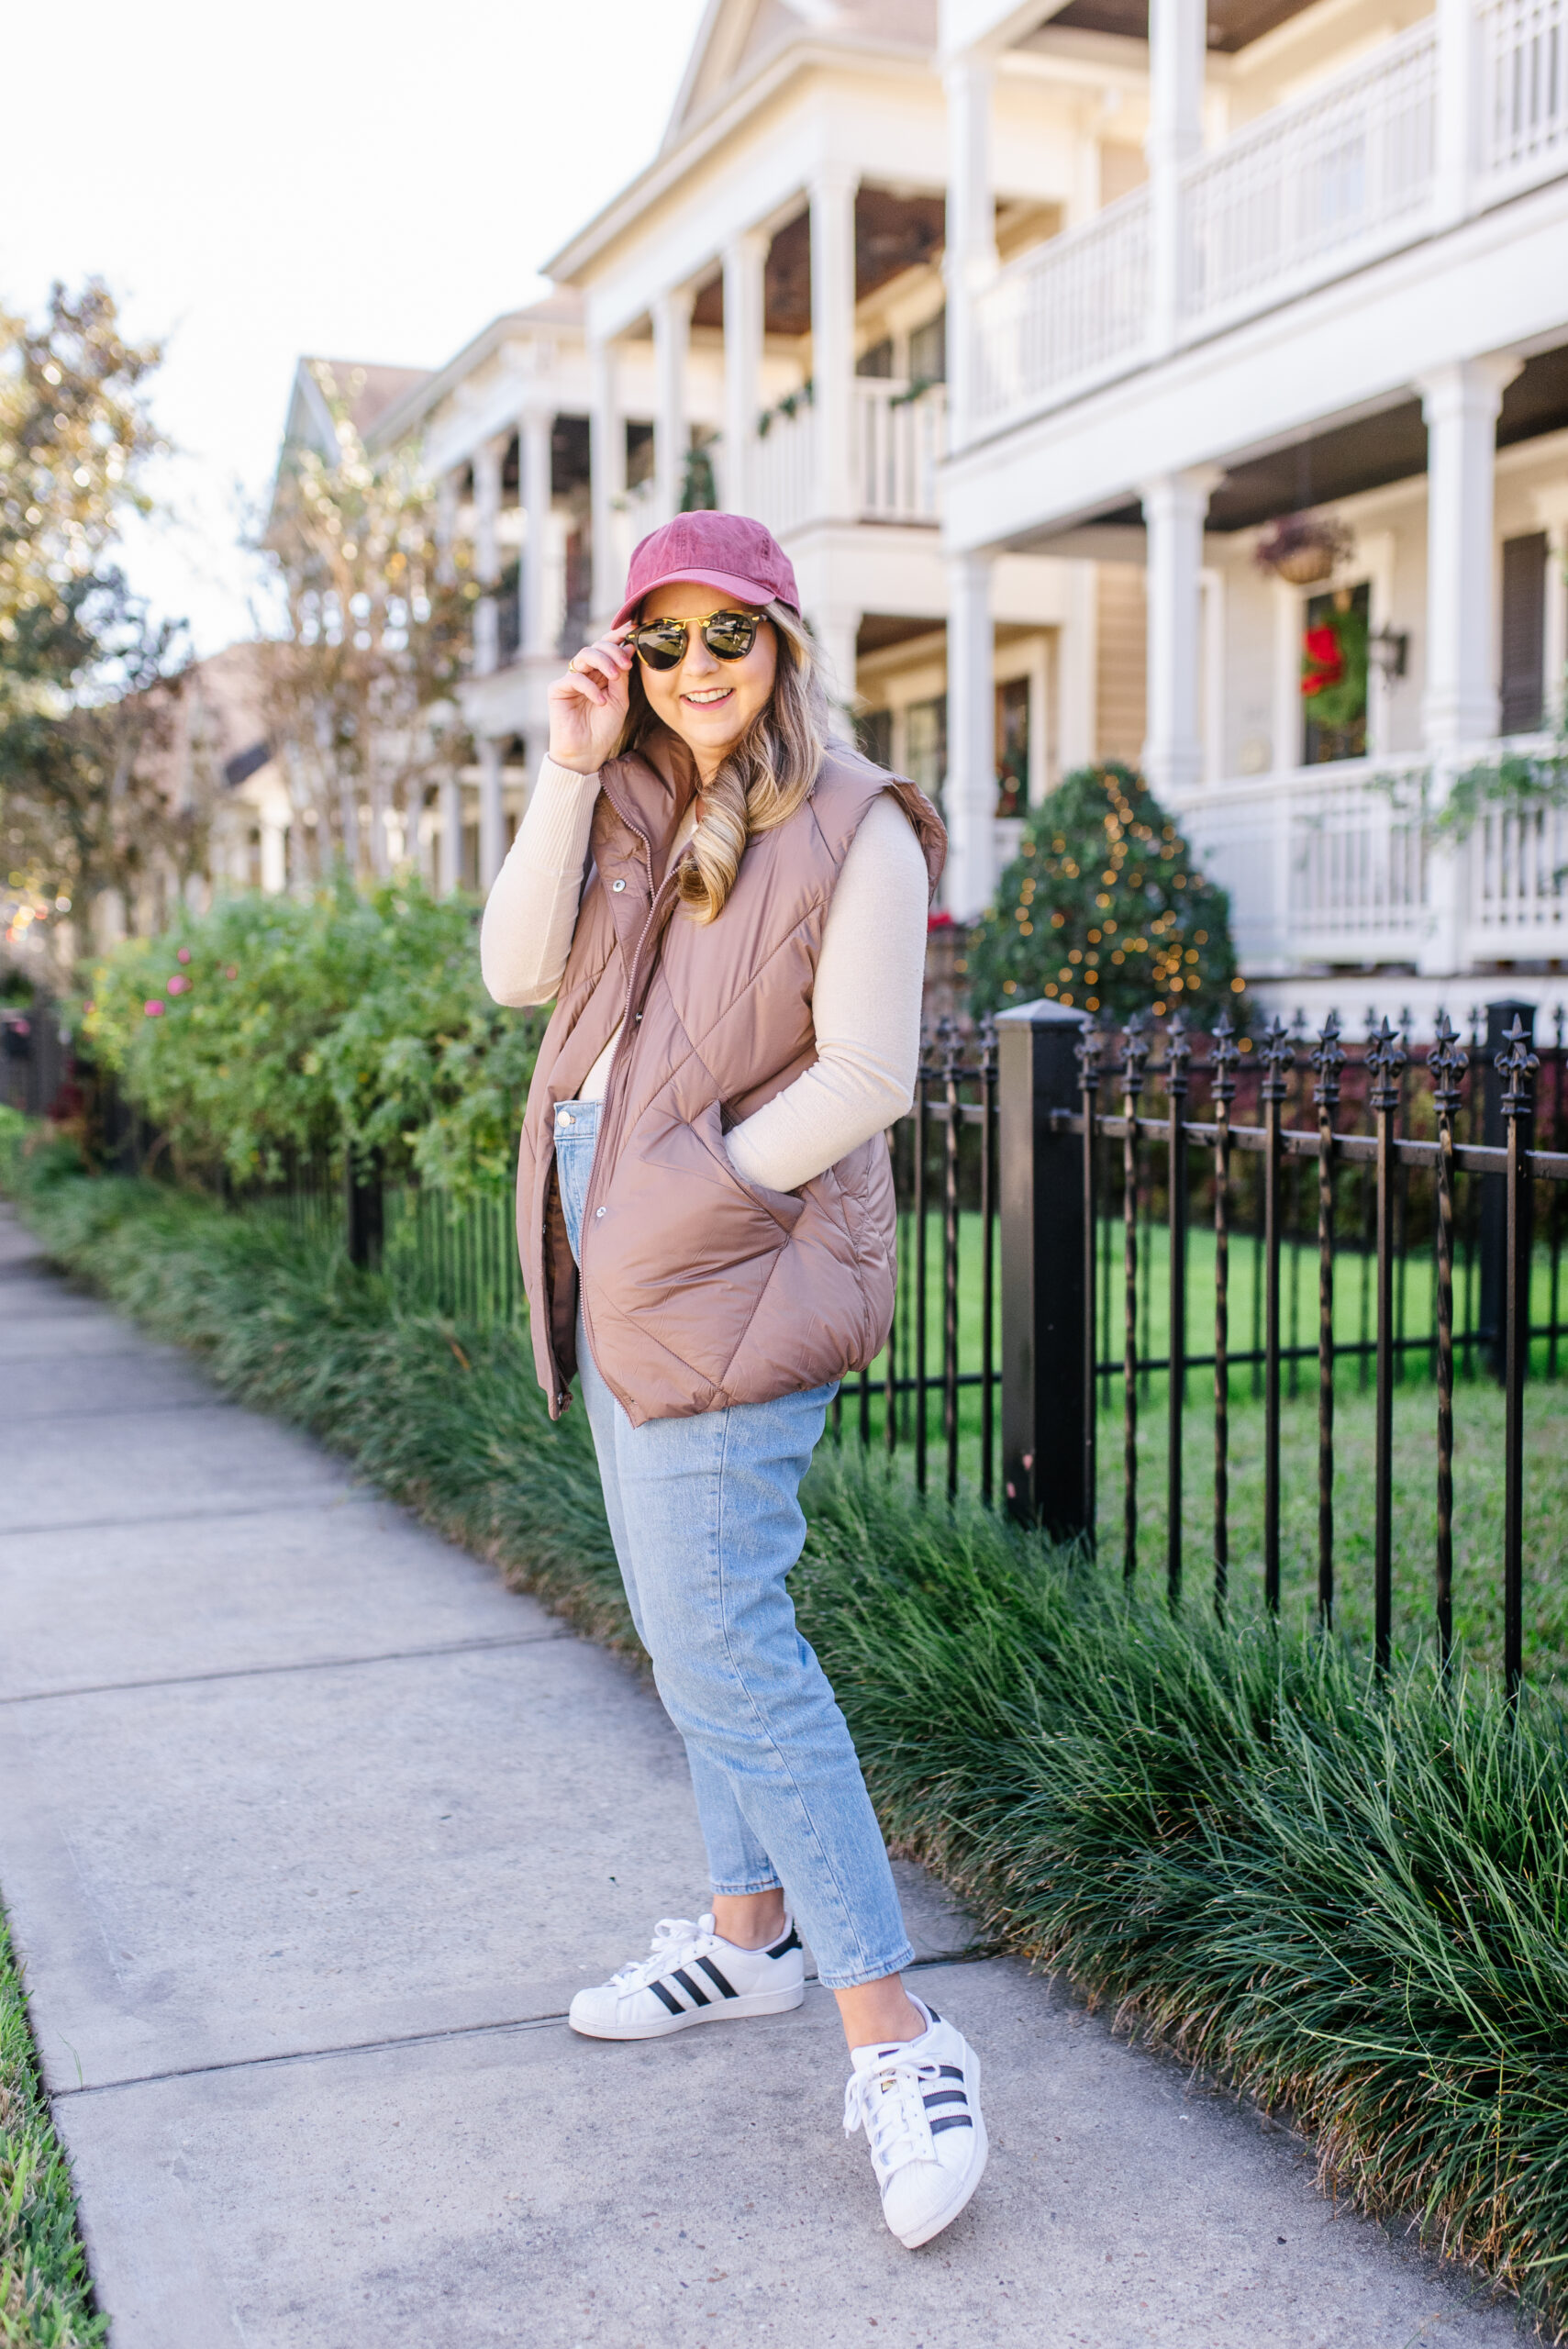 How To Style A Vest for a Casual Winter Look